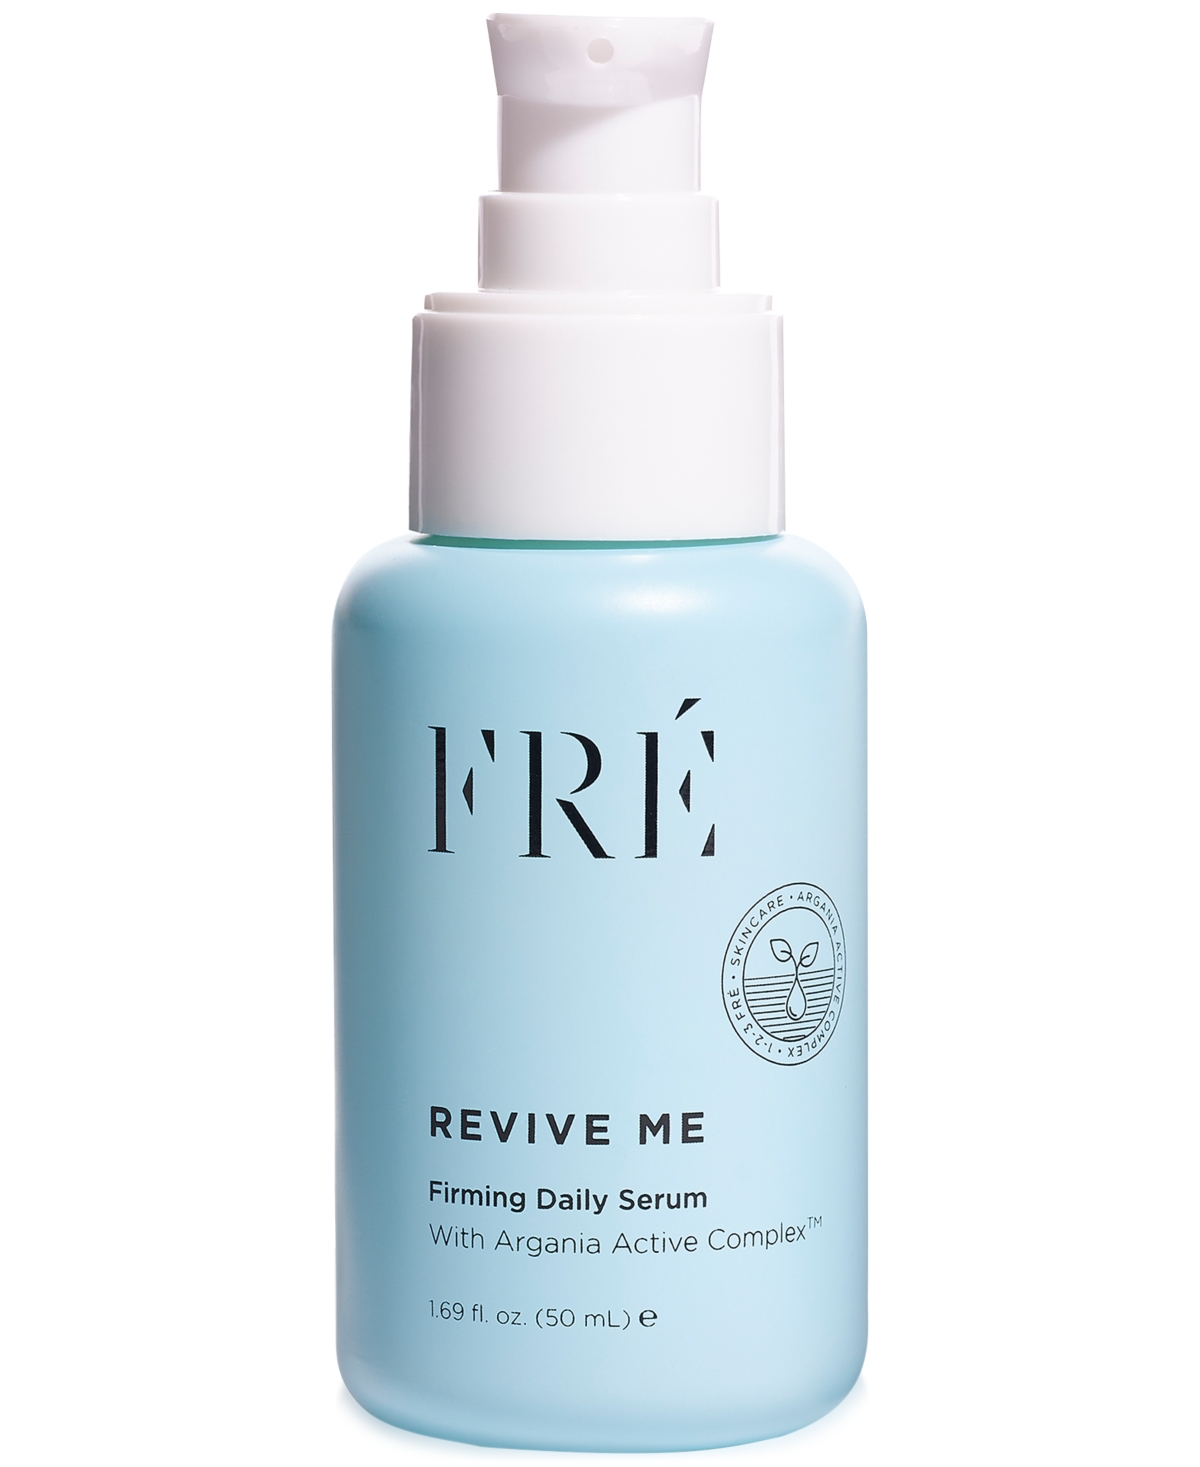 Revive Me Firming Daily Serum, 1.69oz.